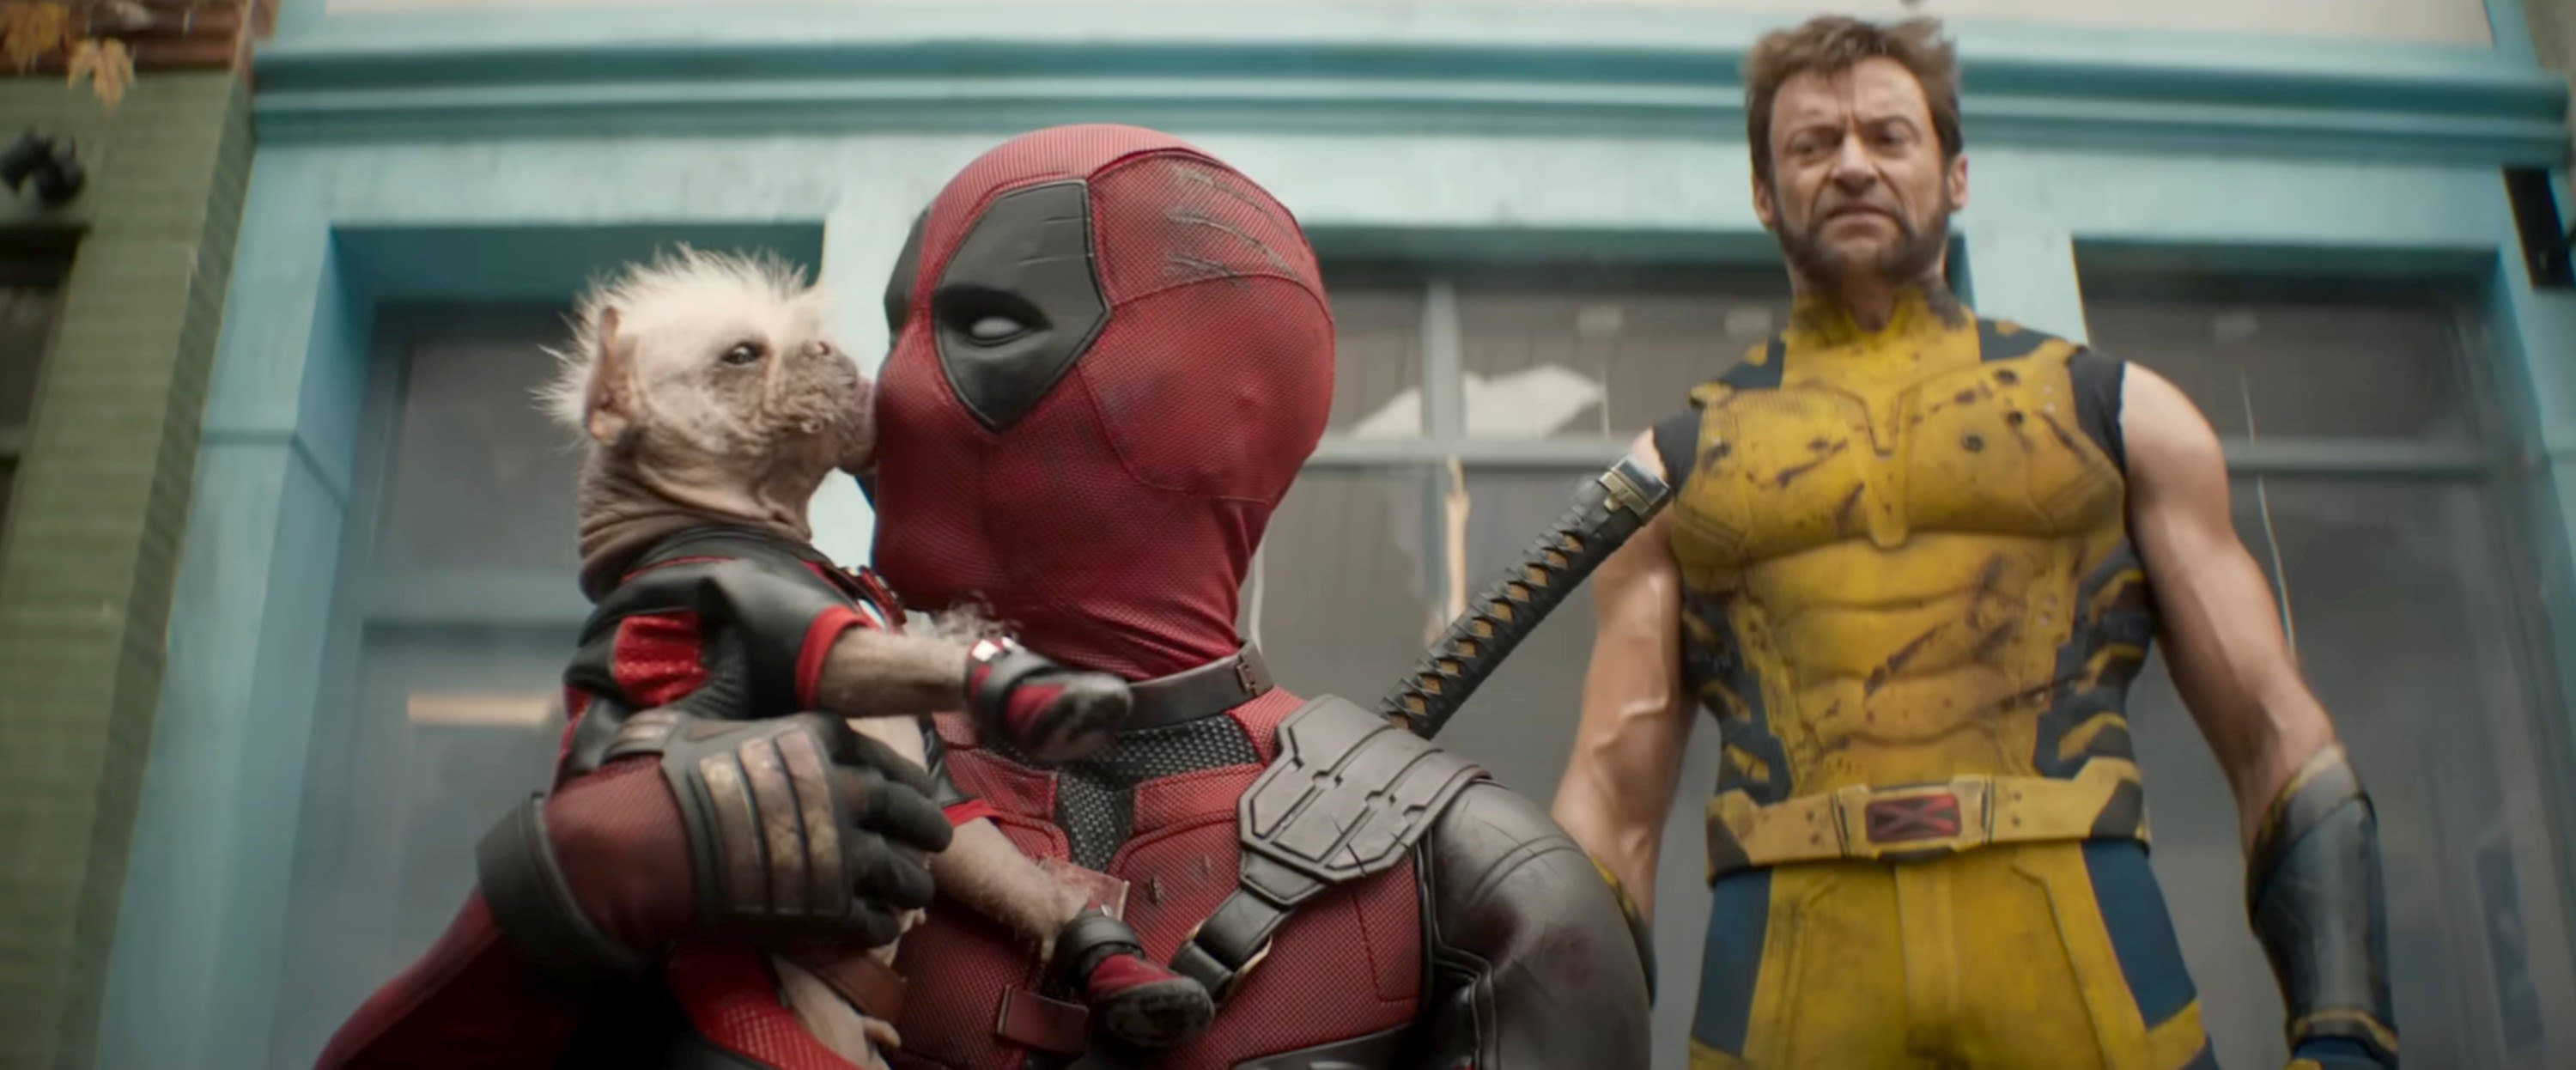 ‘Deadpool & Wolverine’ Soaring To R-Rated Record Preview Of $35M-$40M+ As Ryan Reynolds & Hugh Jackman Hit Comic-Con